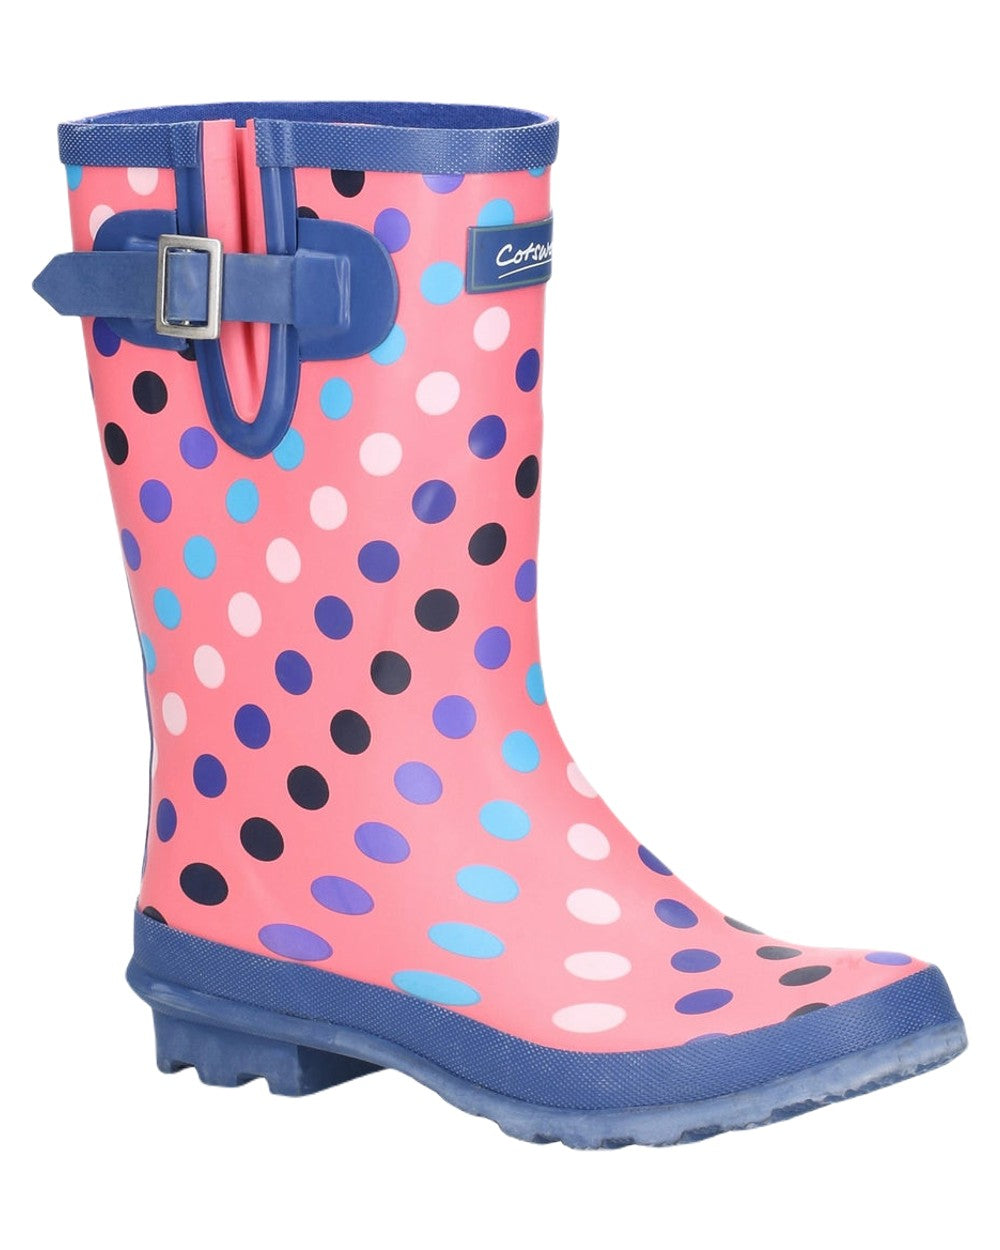 Cotswold Paxford Elasticated Mid Calf Wellington Boots In Pink Multi Spots 